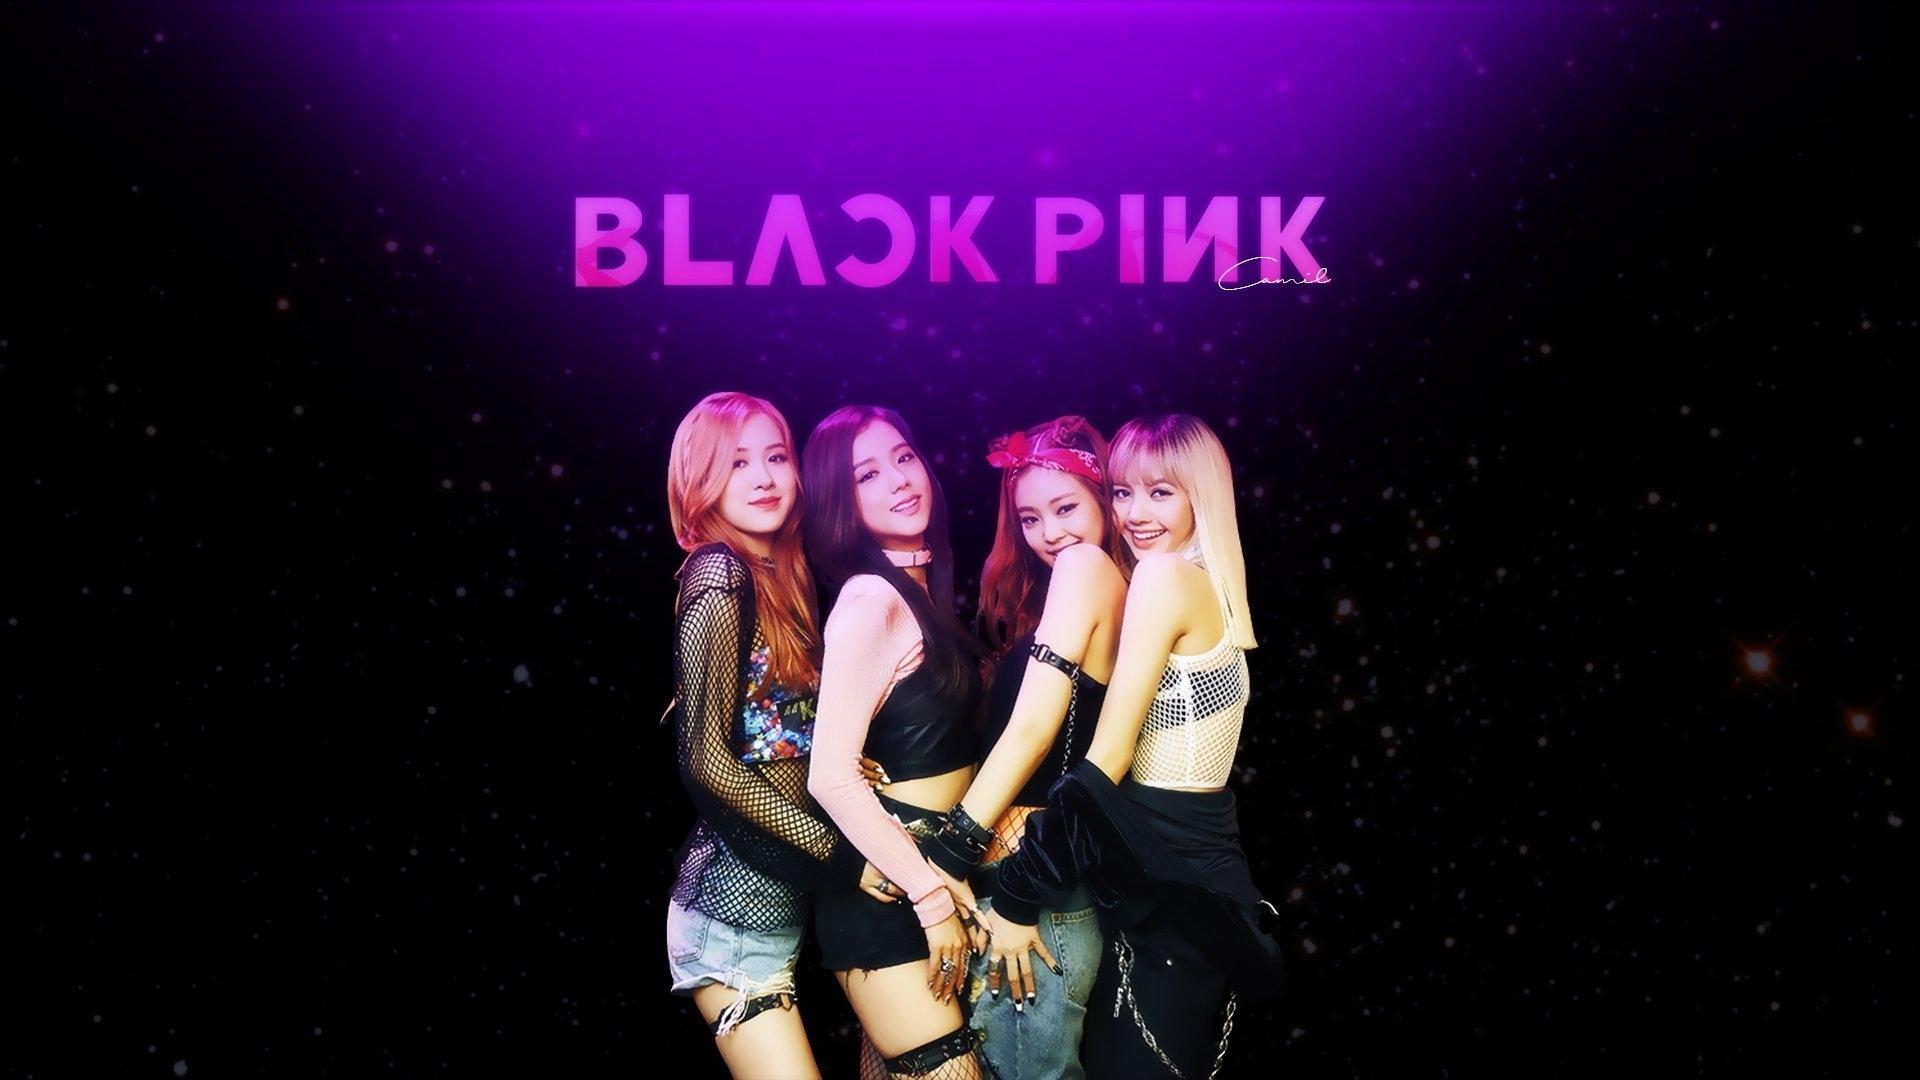 New Black Pink Wallpaper Kpop FULL HD 1920×1080 For PC Background